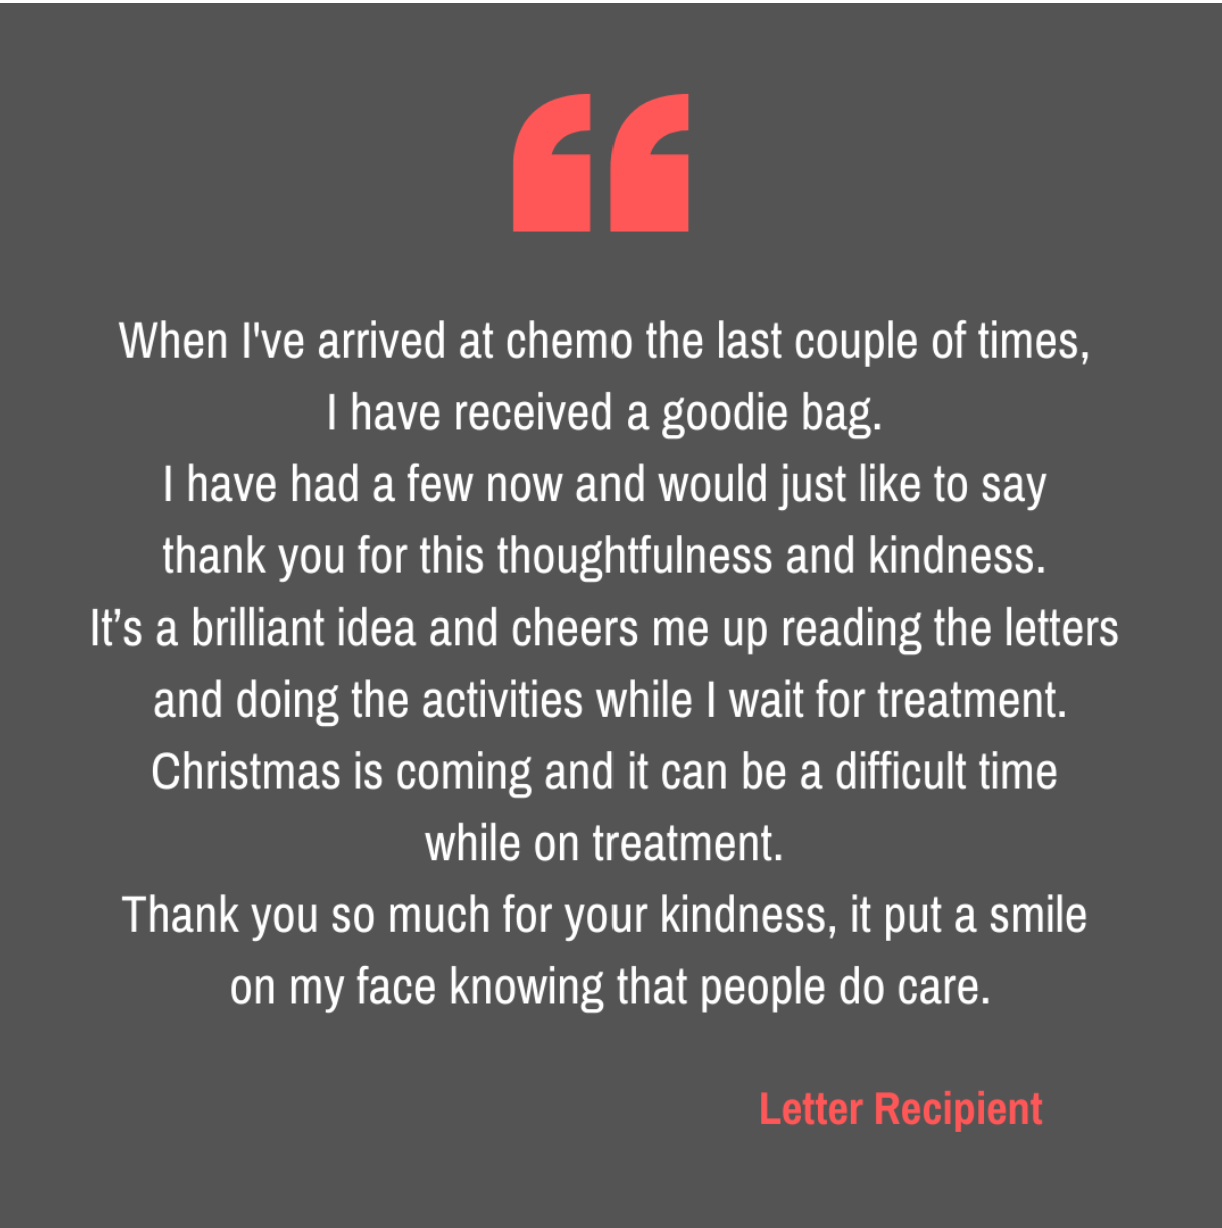 Christmas is coming - Letter Recipient - Quote Image.png